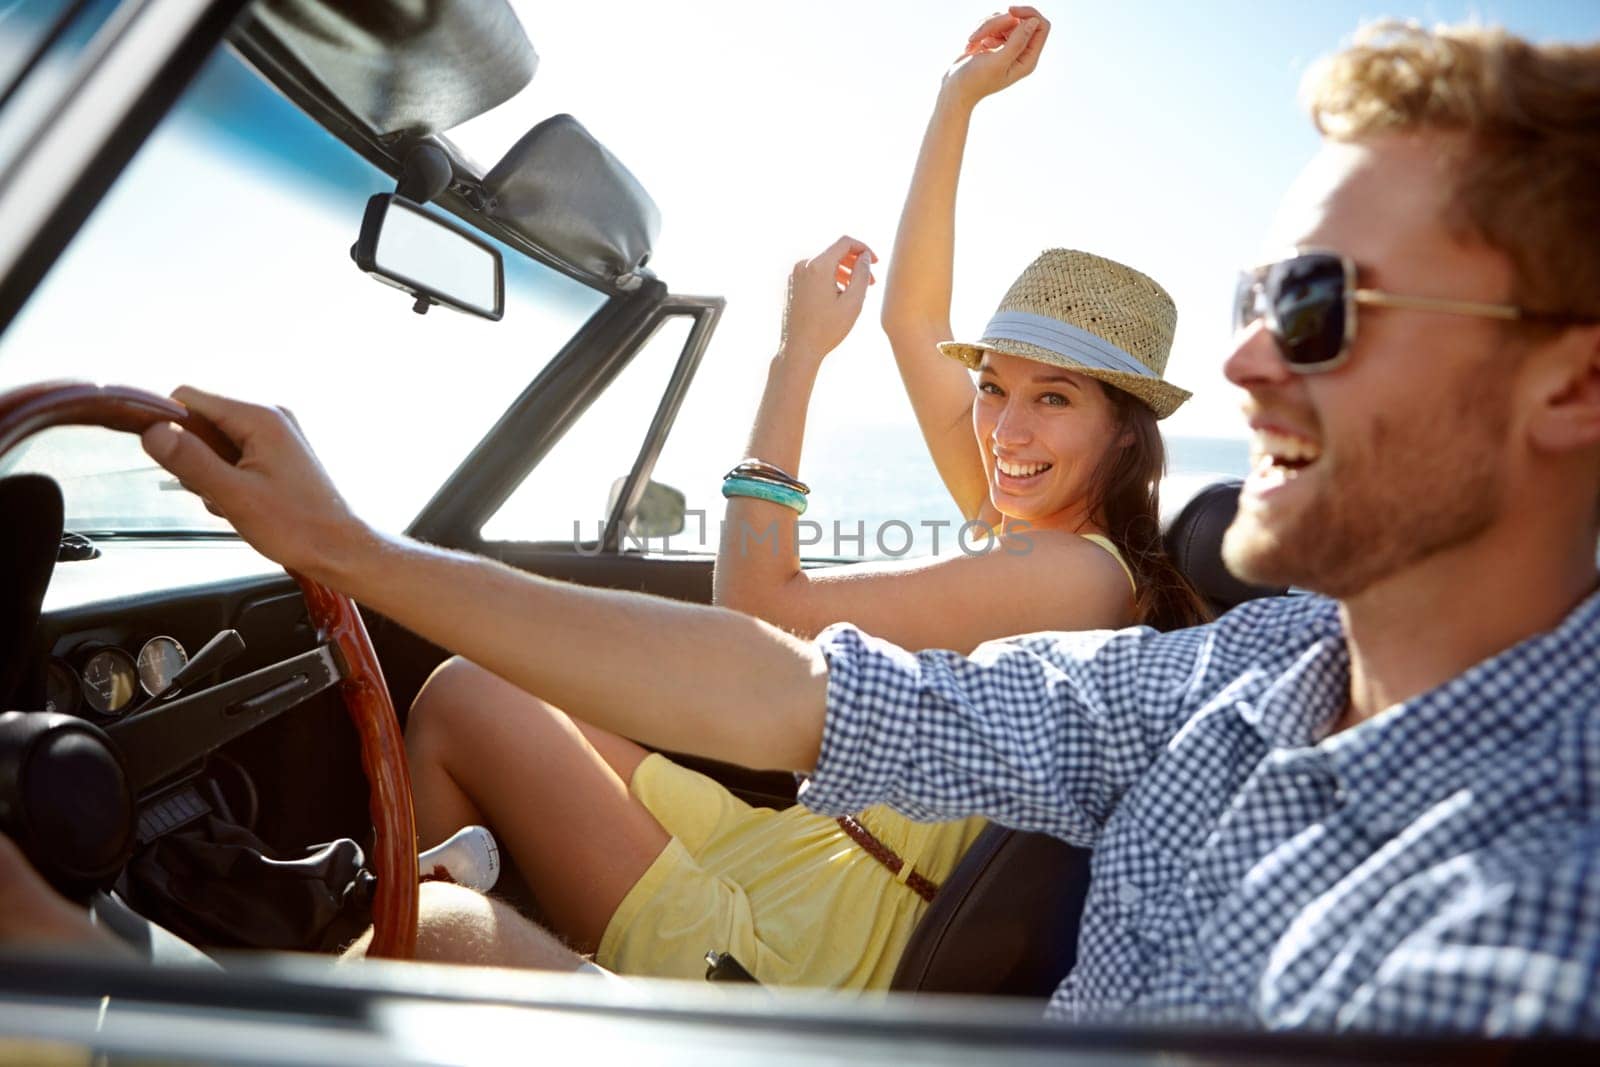 Car road trip, travel and profile of happy couple on bonding holiday adventure, transportation journey or fun summer vacation. Love flare, convertible vehicle and driver driving in Canada countryside.